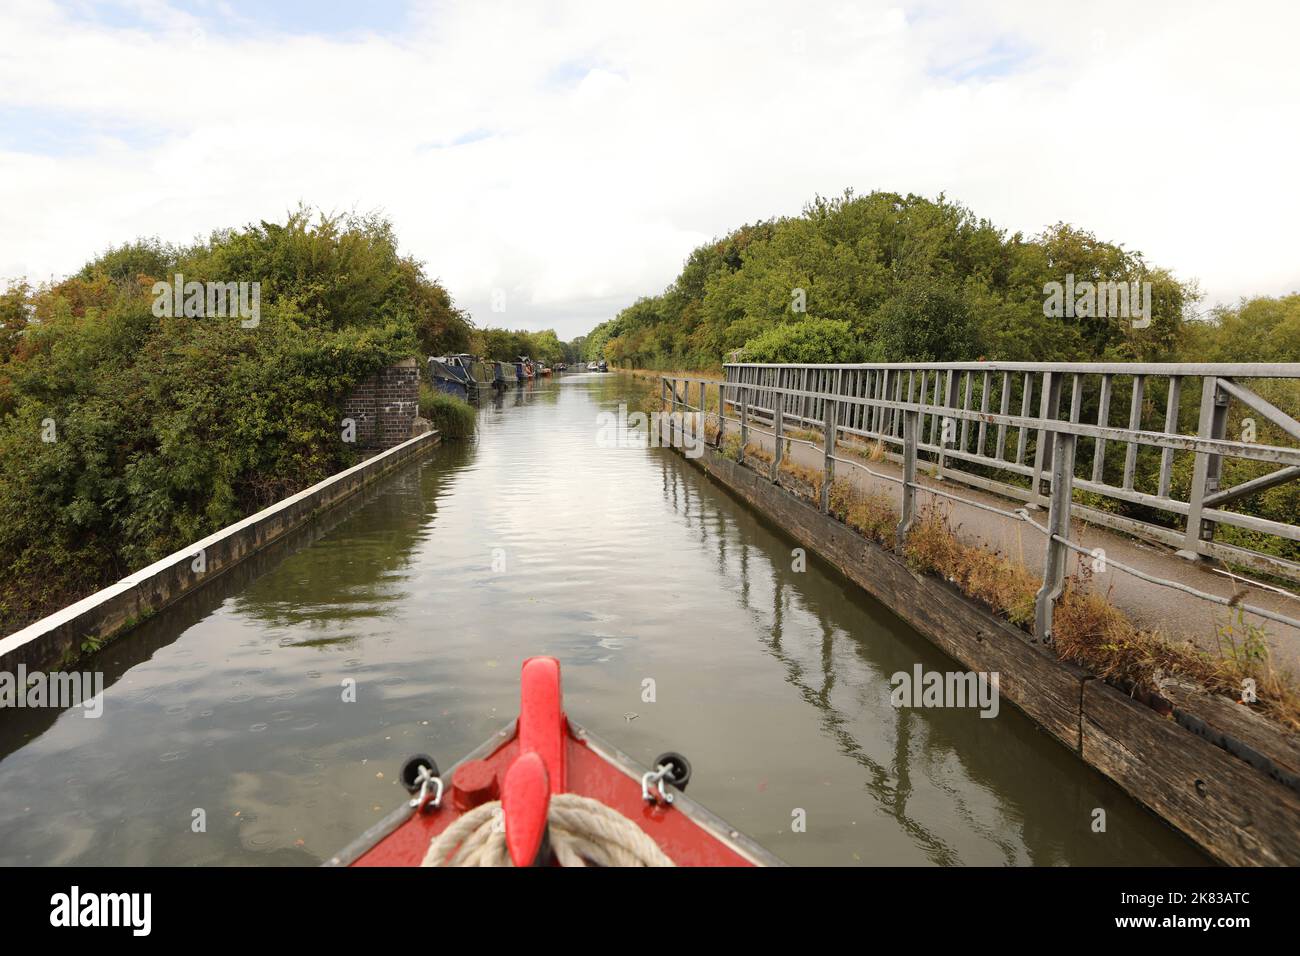 A narrow boat crossing Cosgrove aqueduct on the Grand Union Canal, Buckinghamshire, United Kingdom Stock Photo